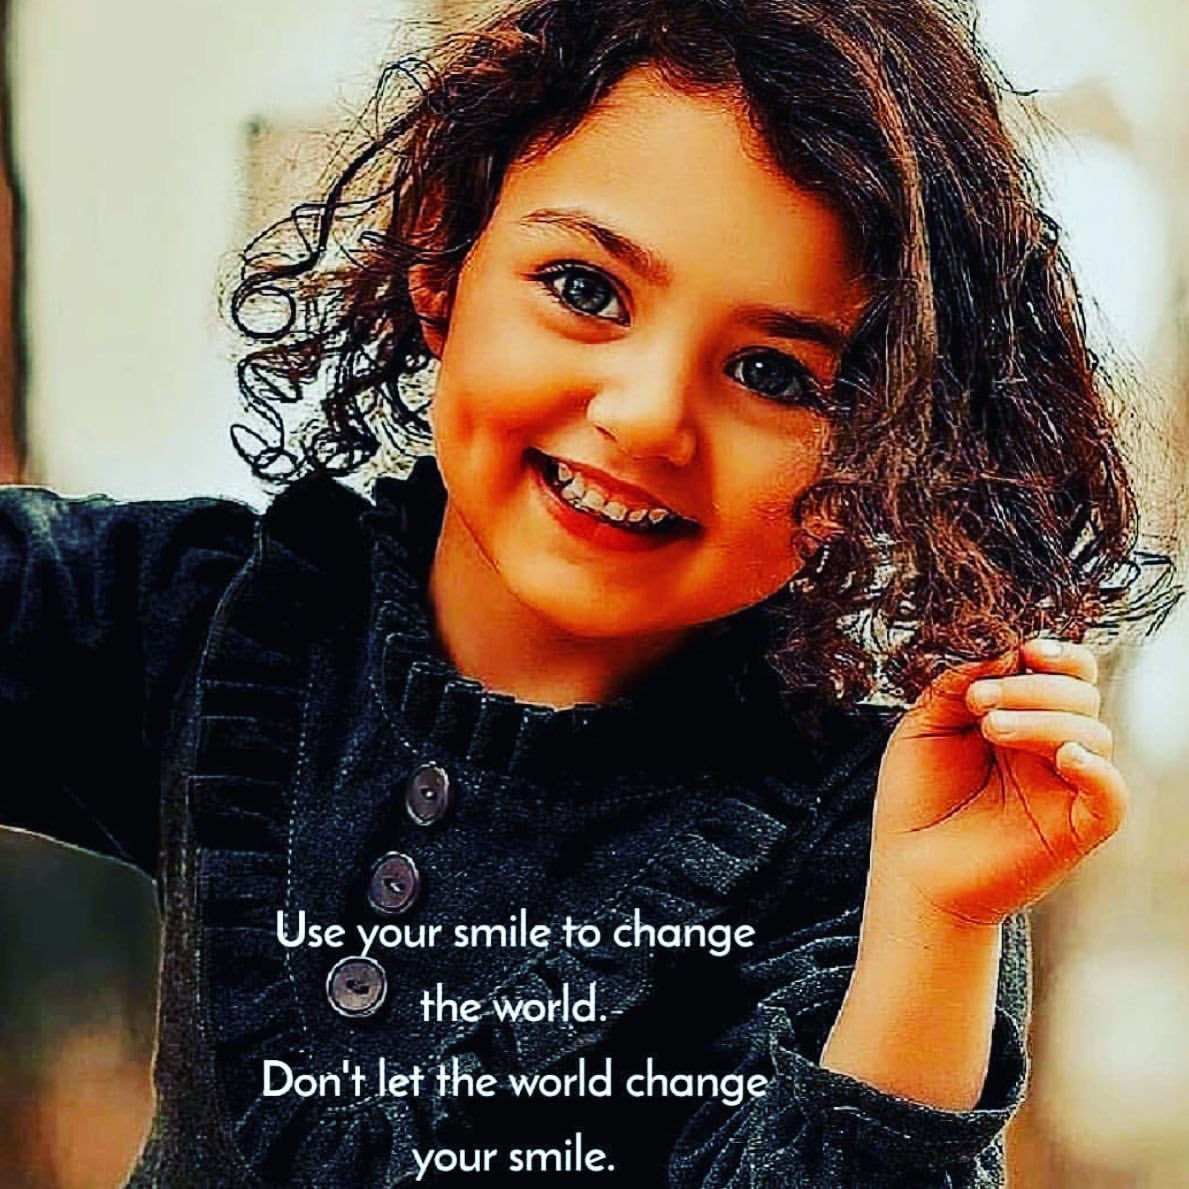 Use our smile to change the world. Don't let the world change your smile.